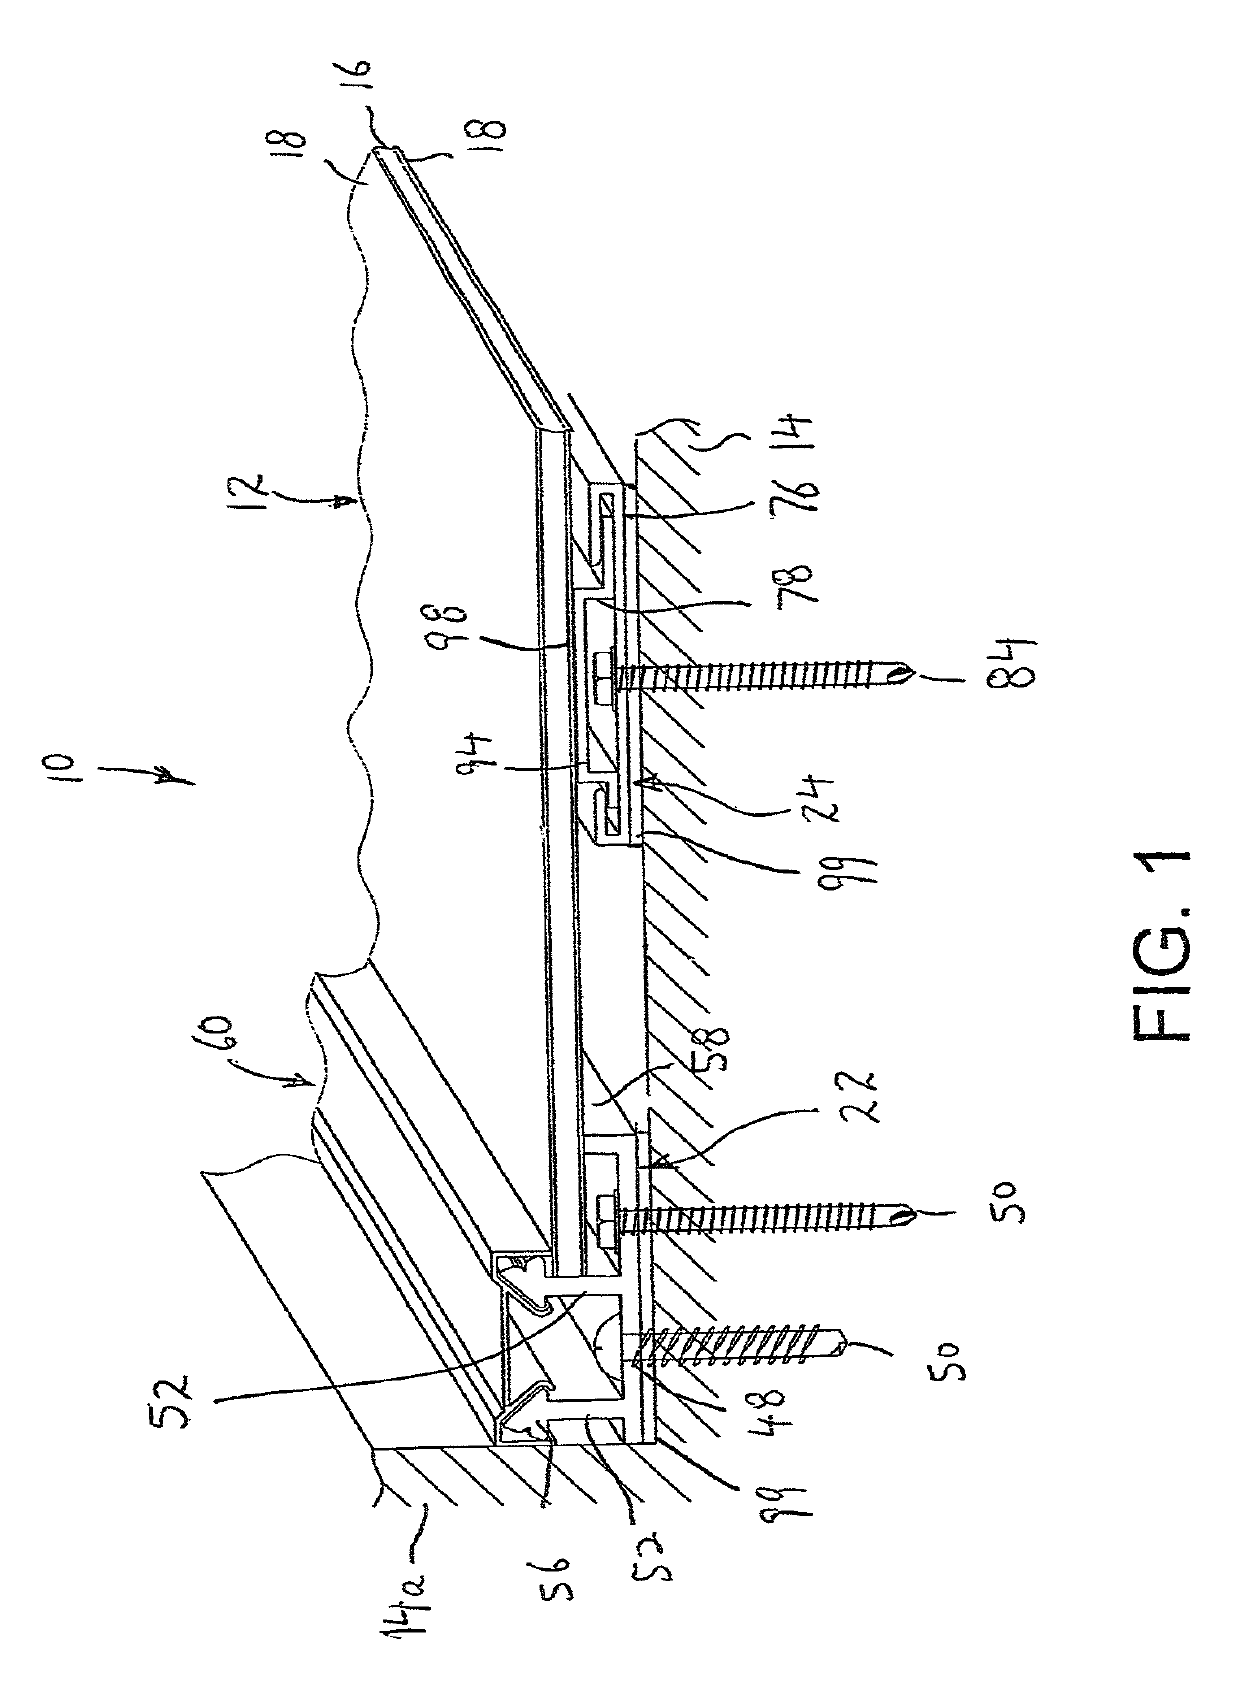 System and method for mounting wall panels to a wall